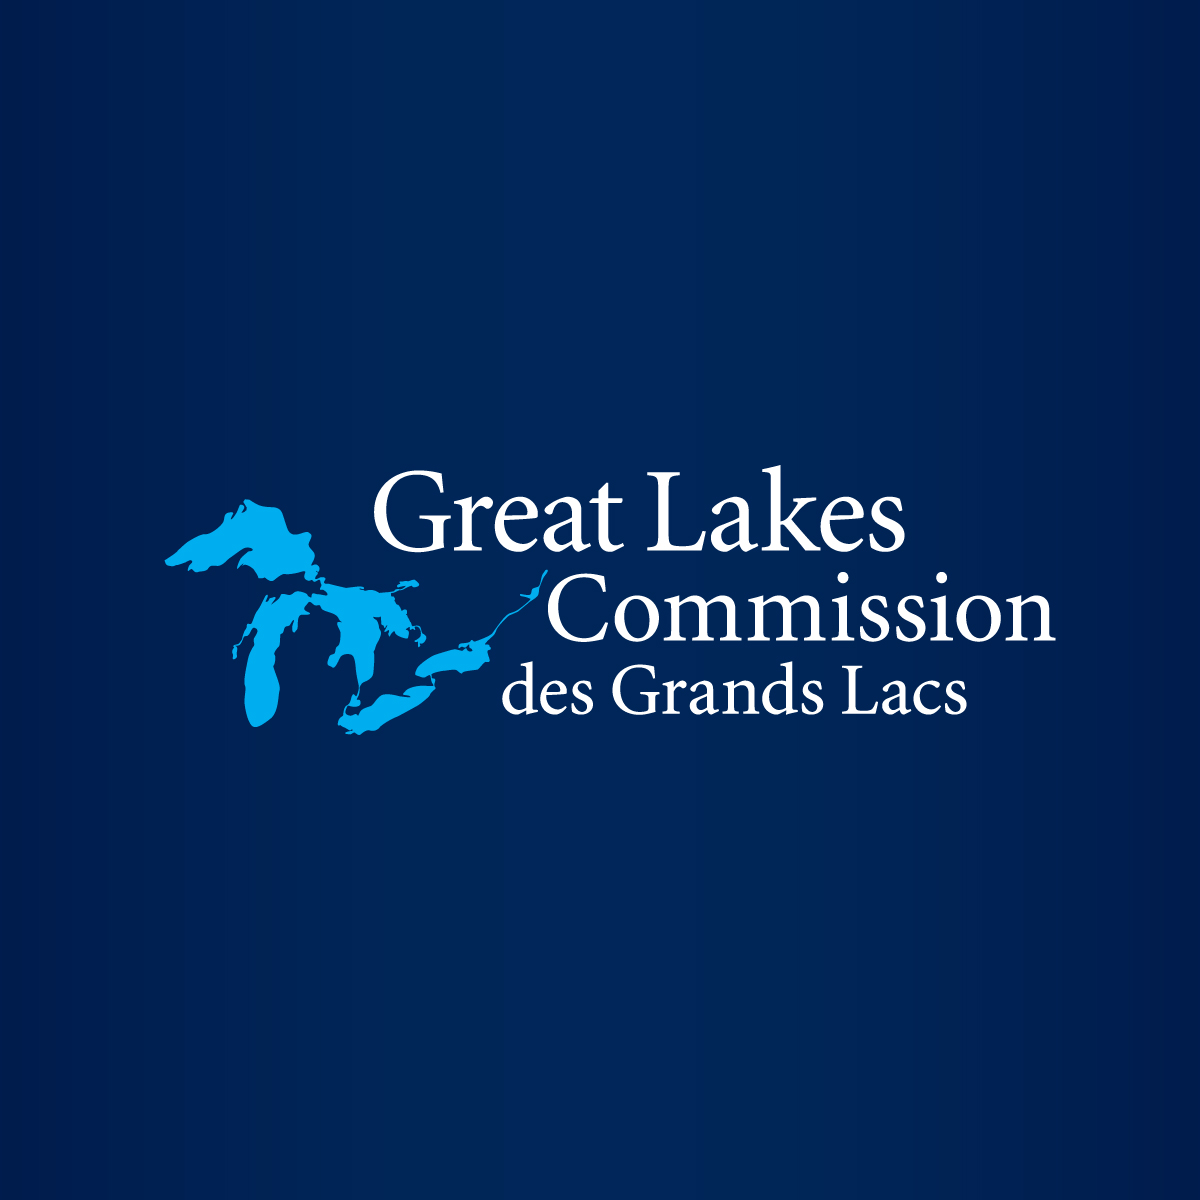 ODNR chief tapped for post on Great Lakes Commission